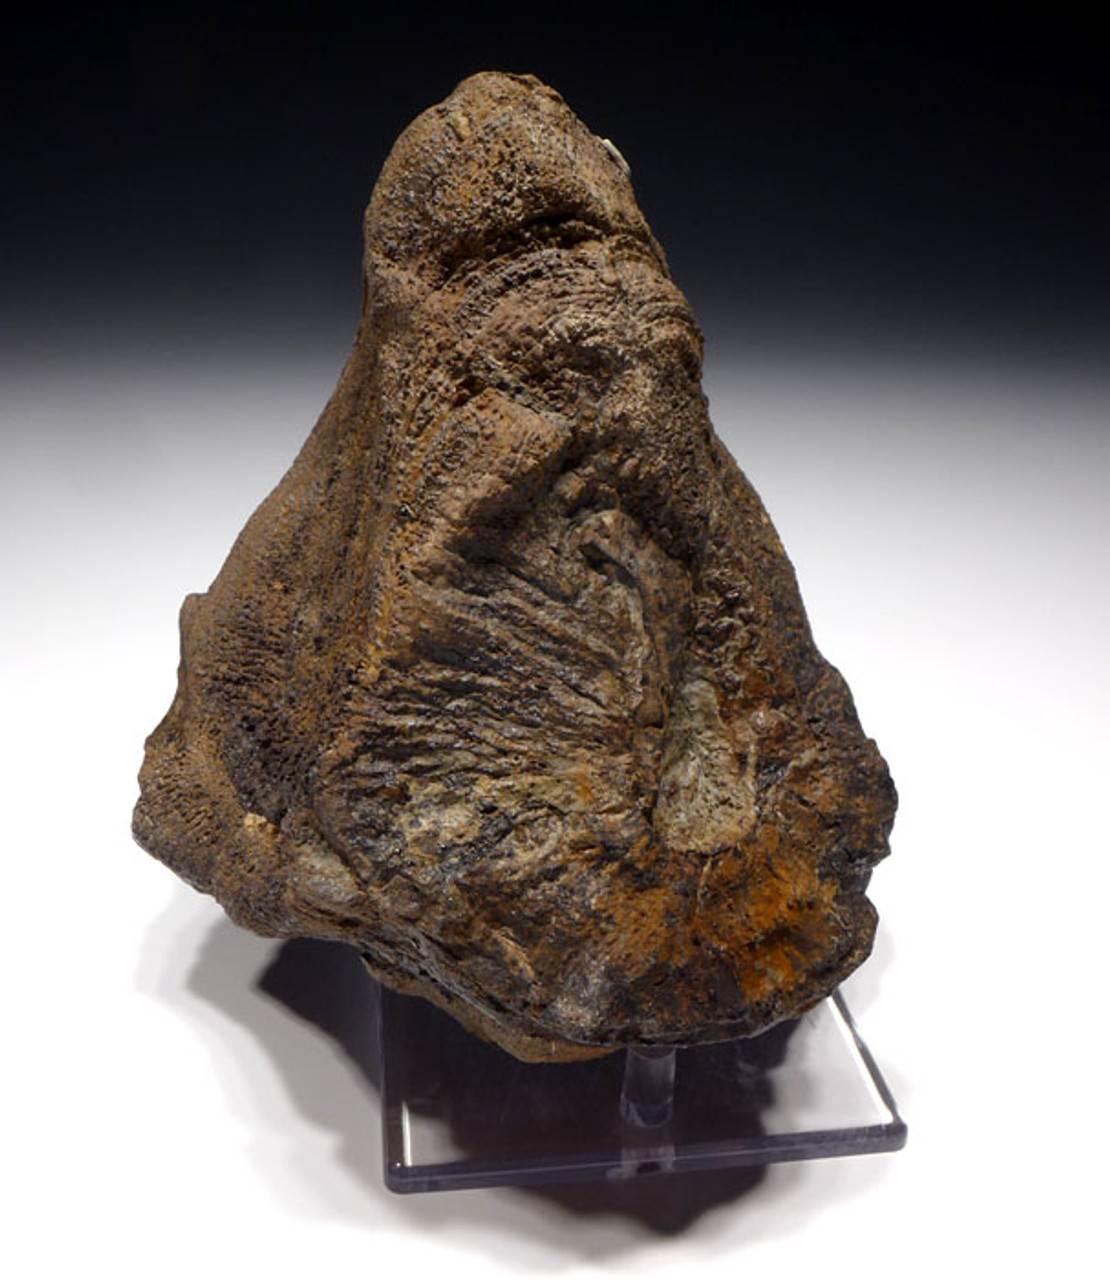 ST015 - EXCEPTIONAL LARGE SLICED AND POLISHED 3D FRESHWATER FOSSIL STROMATOLITE COLONY FROM THE LOWER PERMIAN OF GERMANY